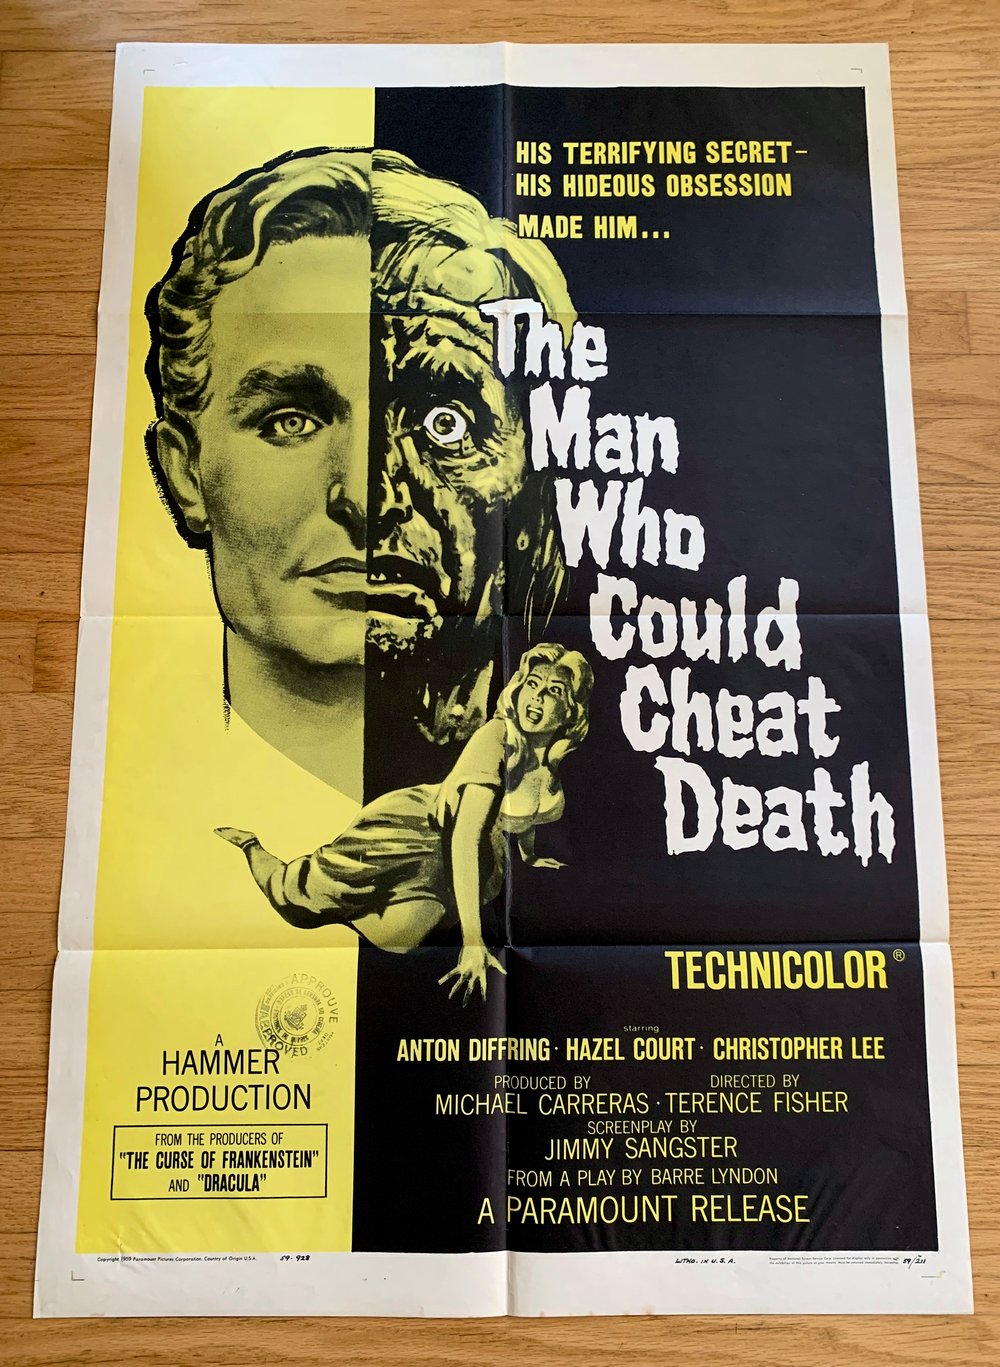 1959 THE MAN WHO COULD CHEAT DEATH Original U.S. One Sheet Movie Poster